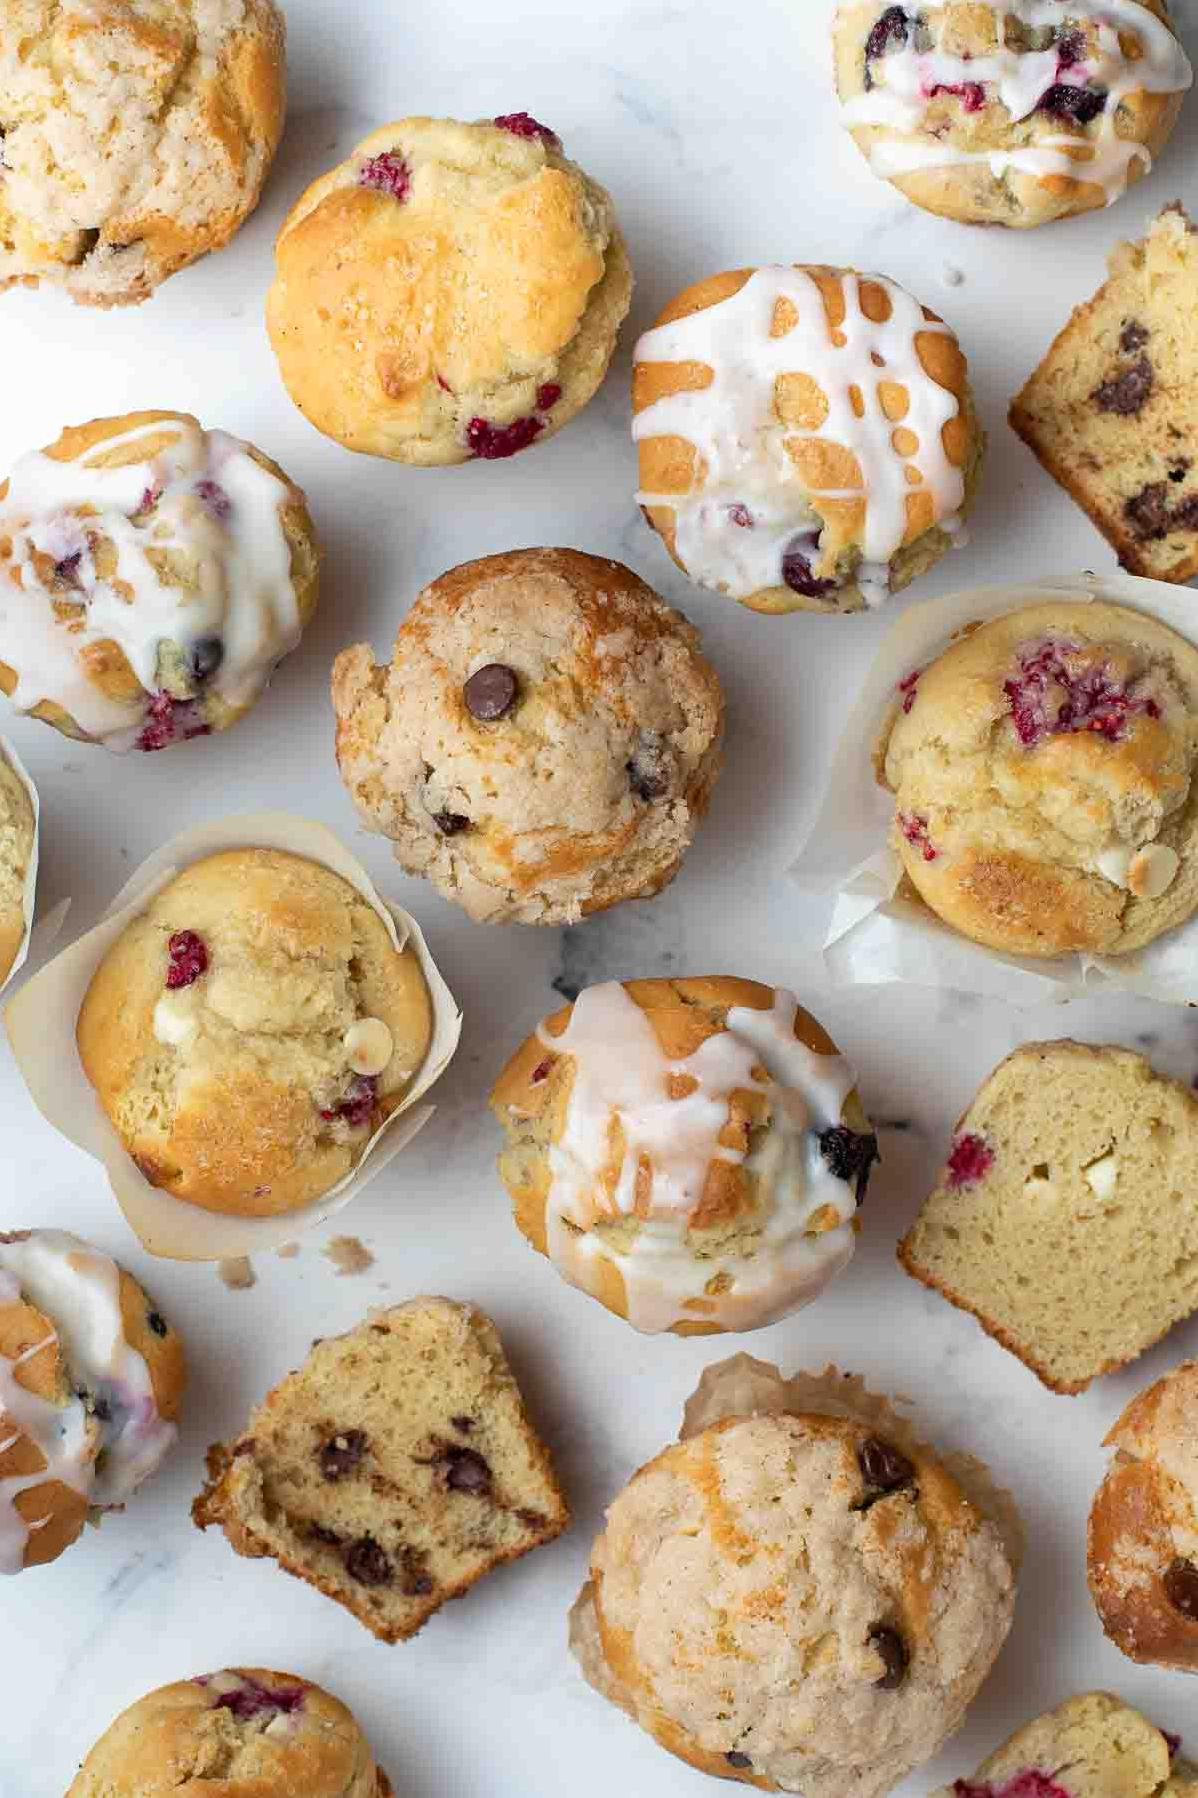  Double the crunch with this unique cereal-filled muffin recipe.